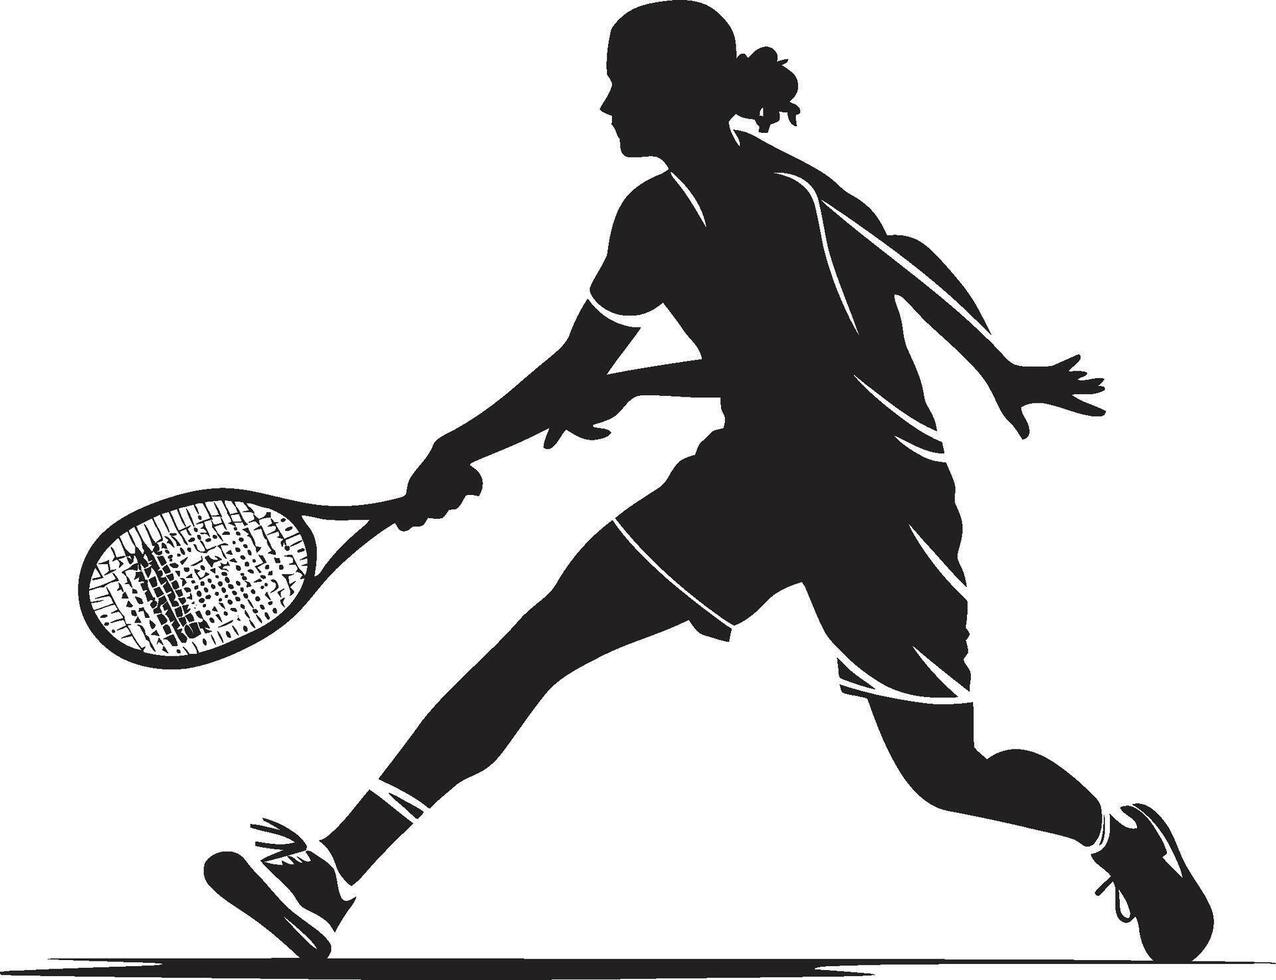 Racket Radiance Vector Logo Design for Female Tennis Brilliance Dynamic Diva Tennis Player Icon in Vector Artistry